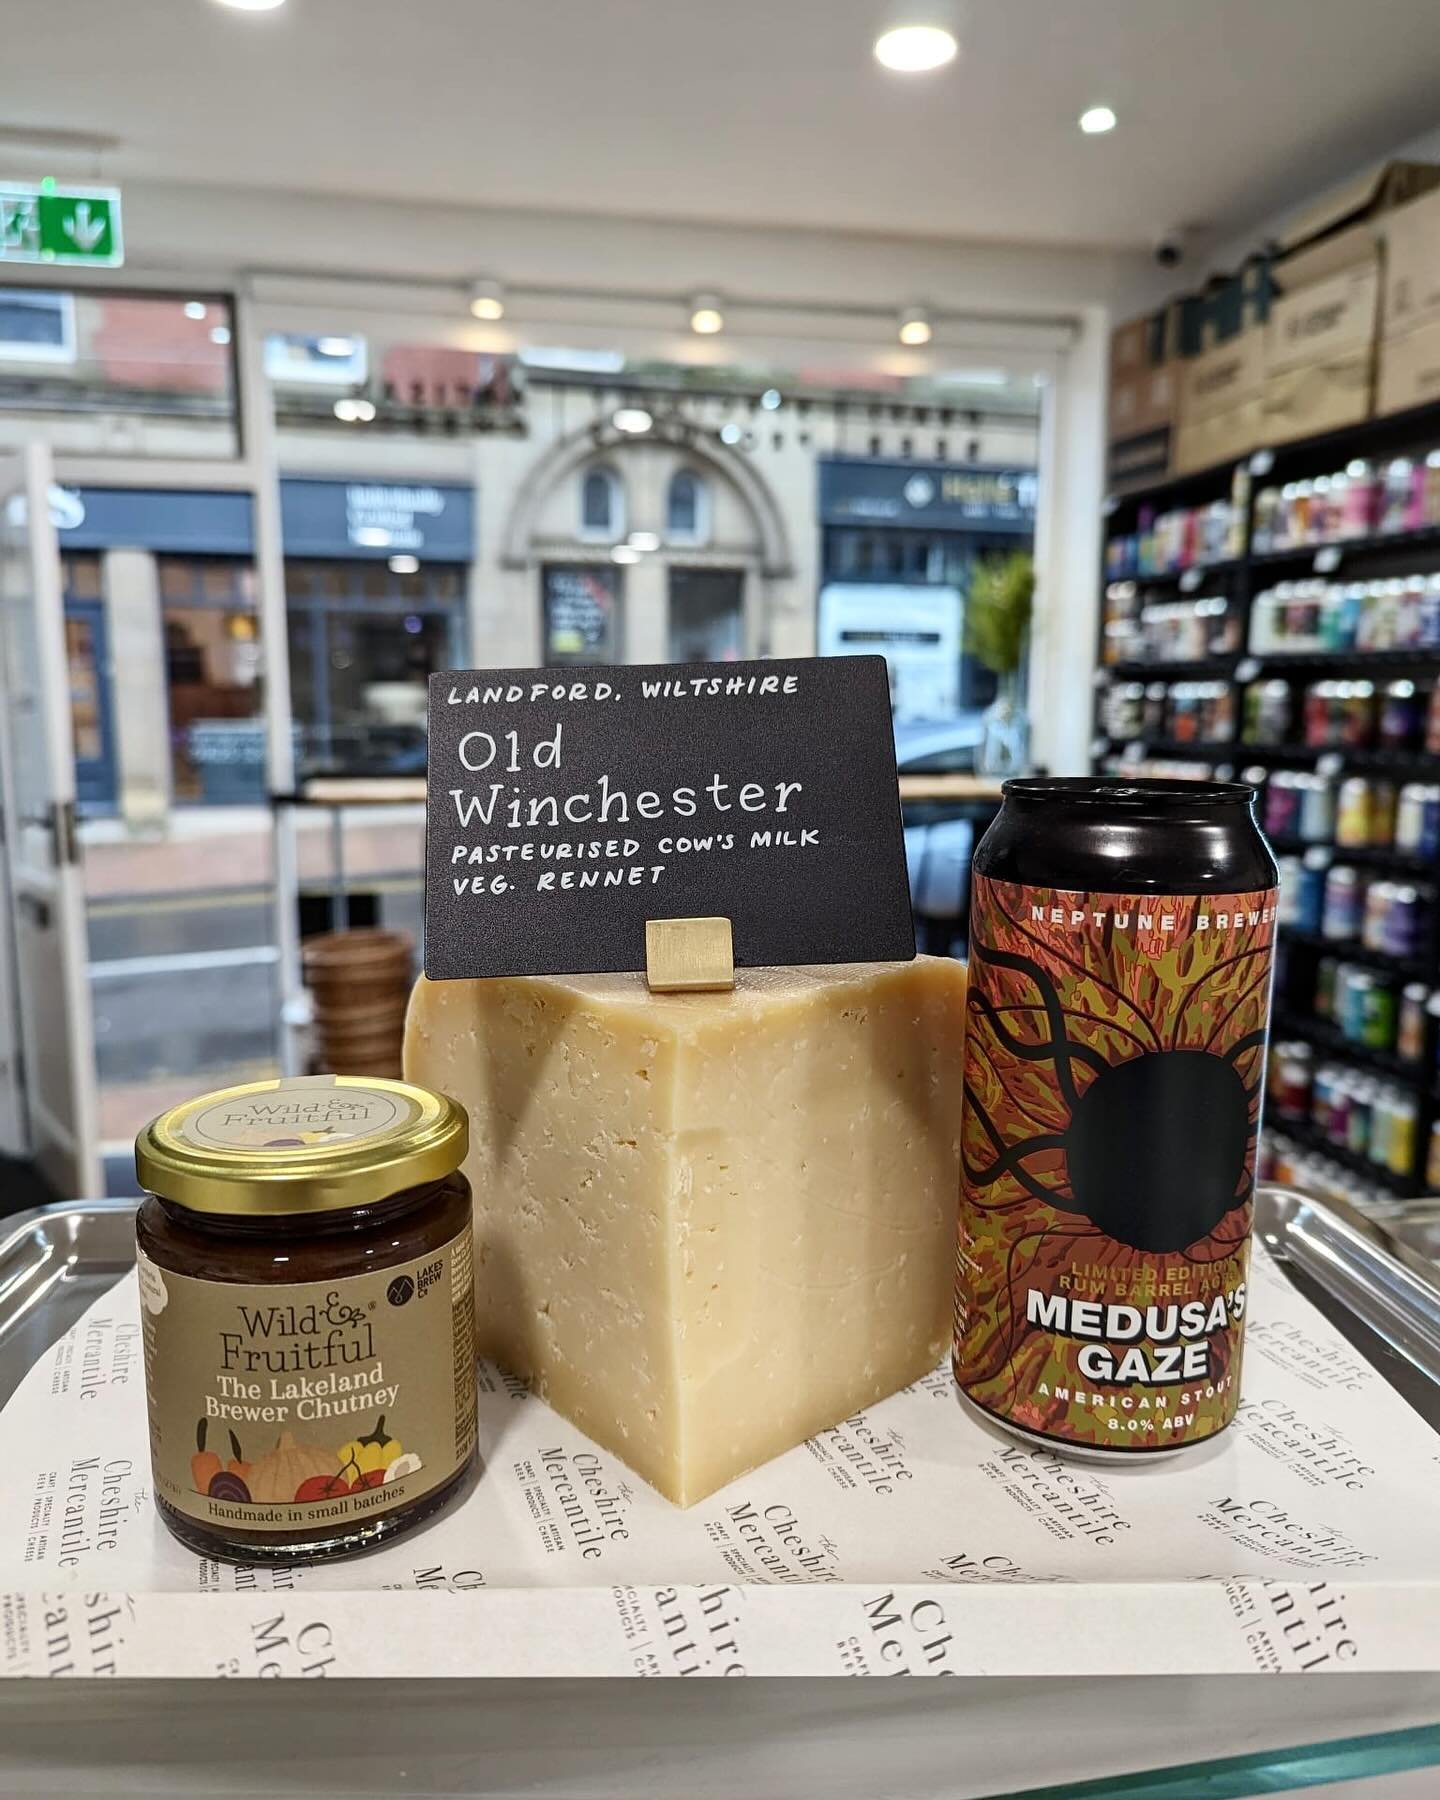 It&rsquo;s that time again, Saturday Sampling:
Somewhere between a Gouda, a Parmesan and Cheddar there is Old Winchester - a brilliant, full flavoured, sweet eat. Needs something equally as flavourful such a Lakeland Brewers Chutney from @wildandfrui